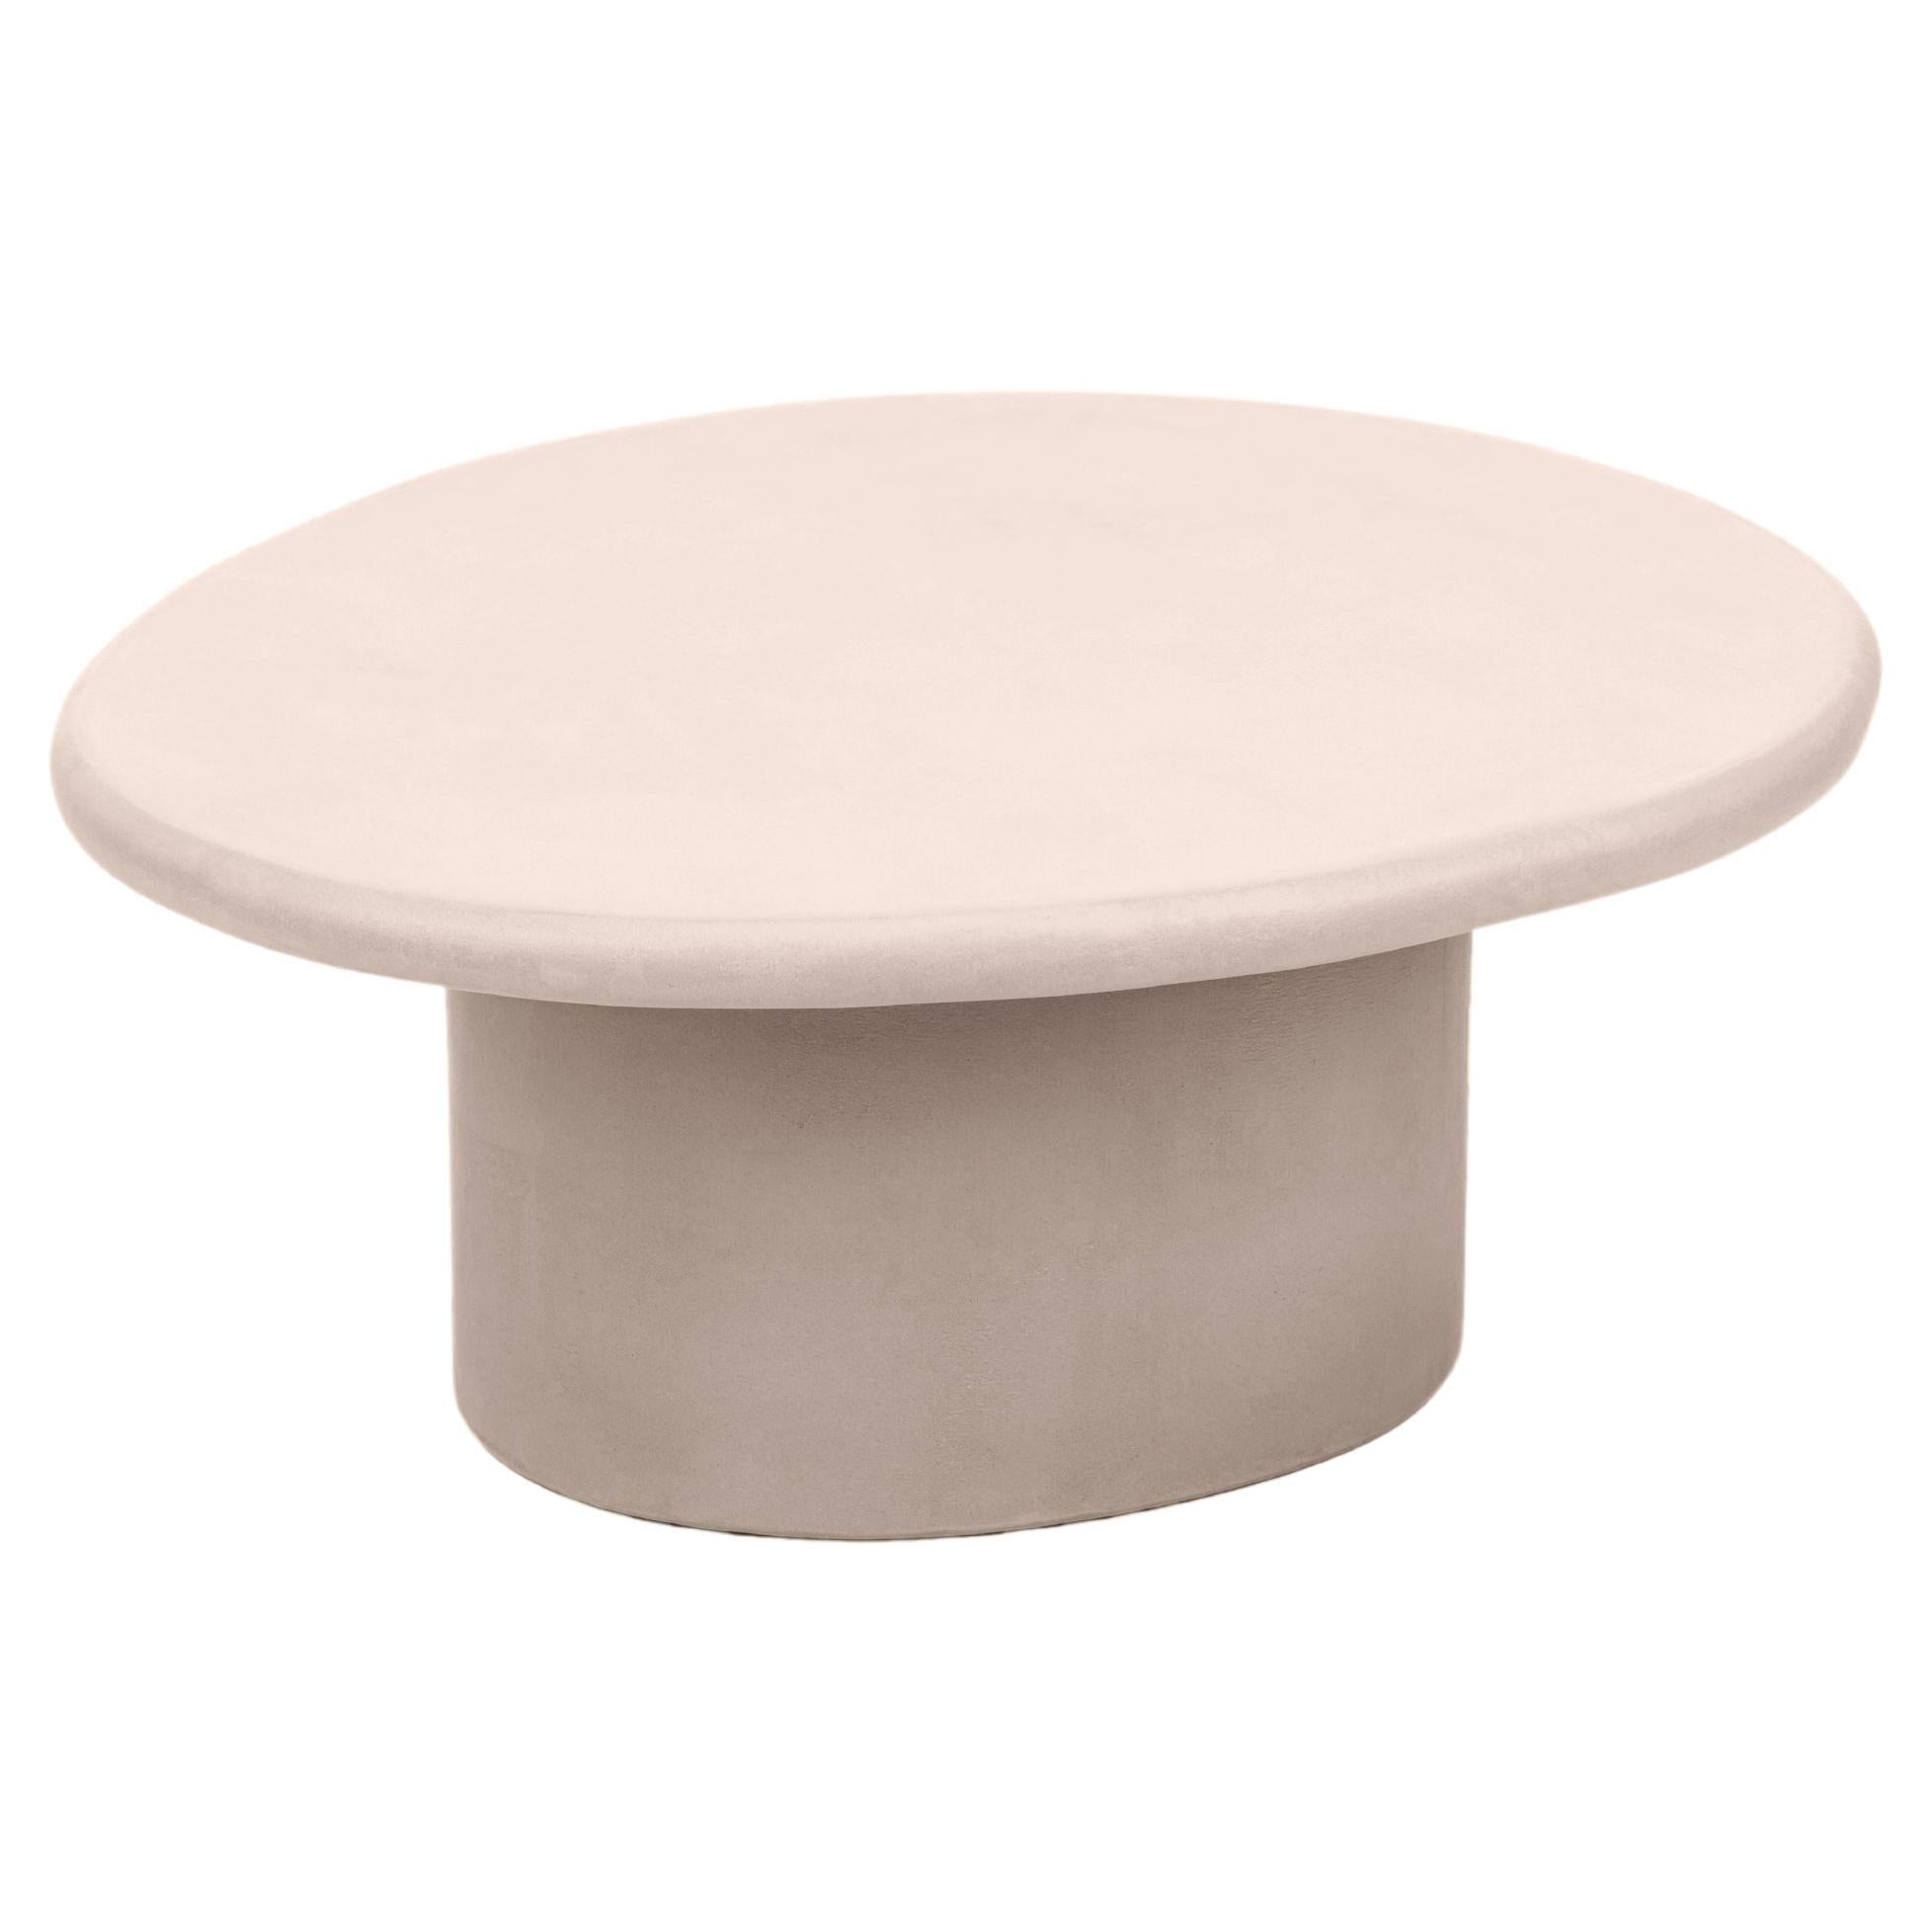 Natural Plaster Coffee Table "Sami" by Isabelle Beaumont For Sale